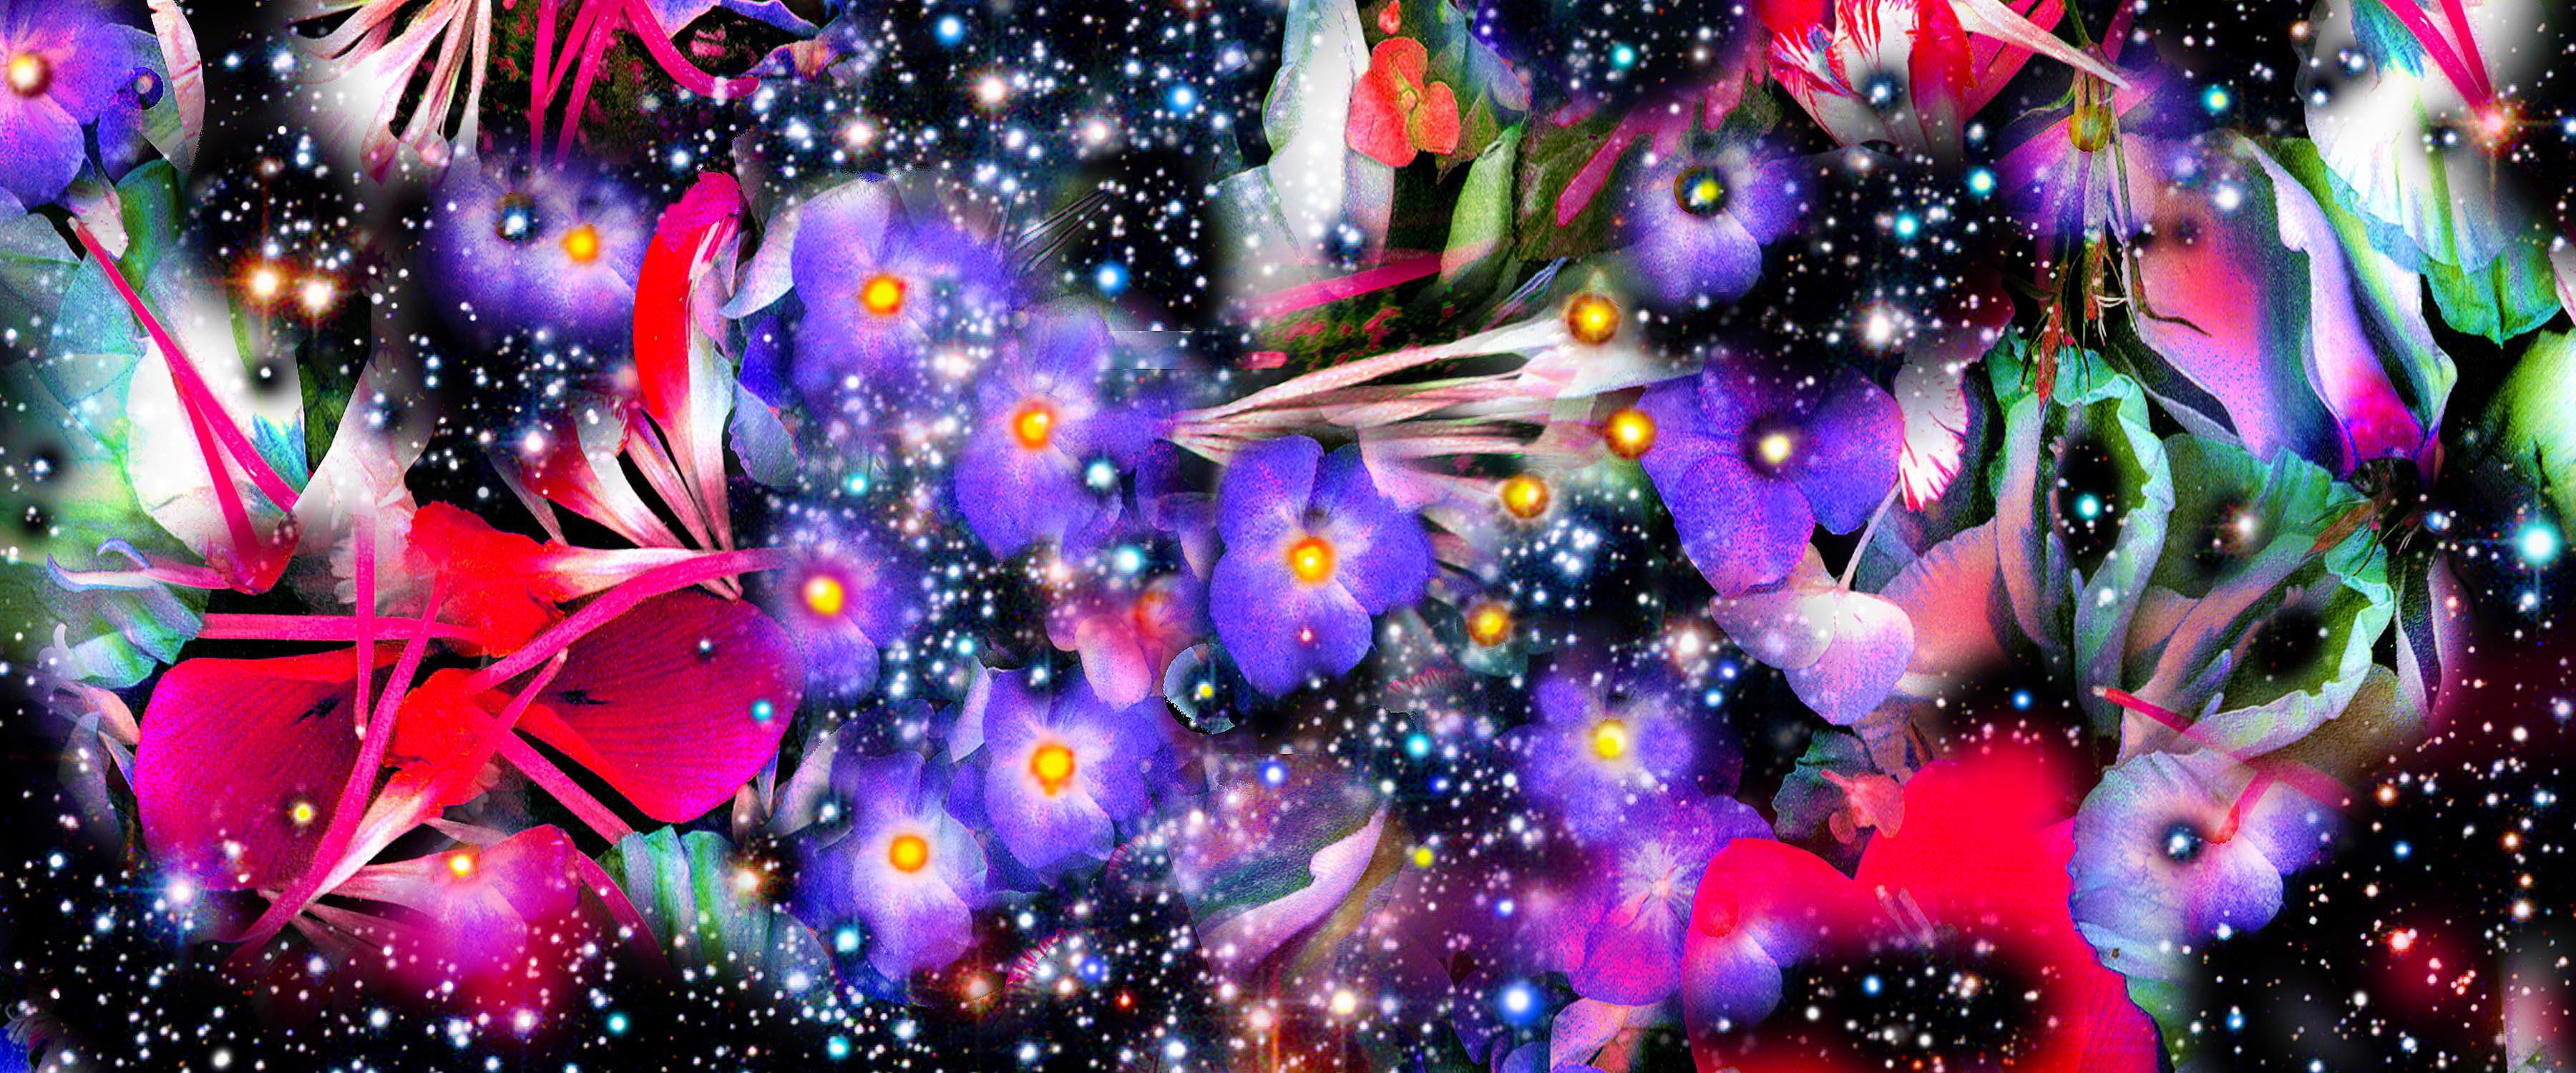 Gardens & Galaxies Purple Flowers 24"x42" colorful abstract night sky patterns  - Art by Susan Kaprov